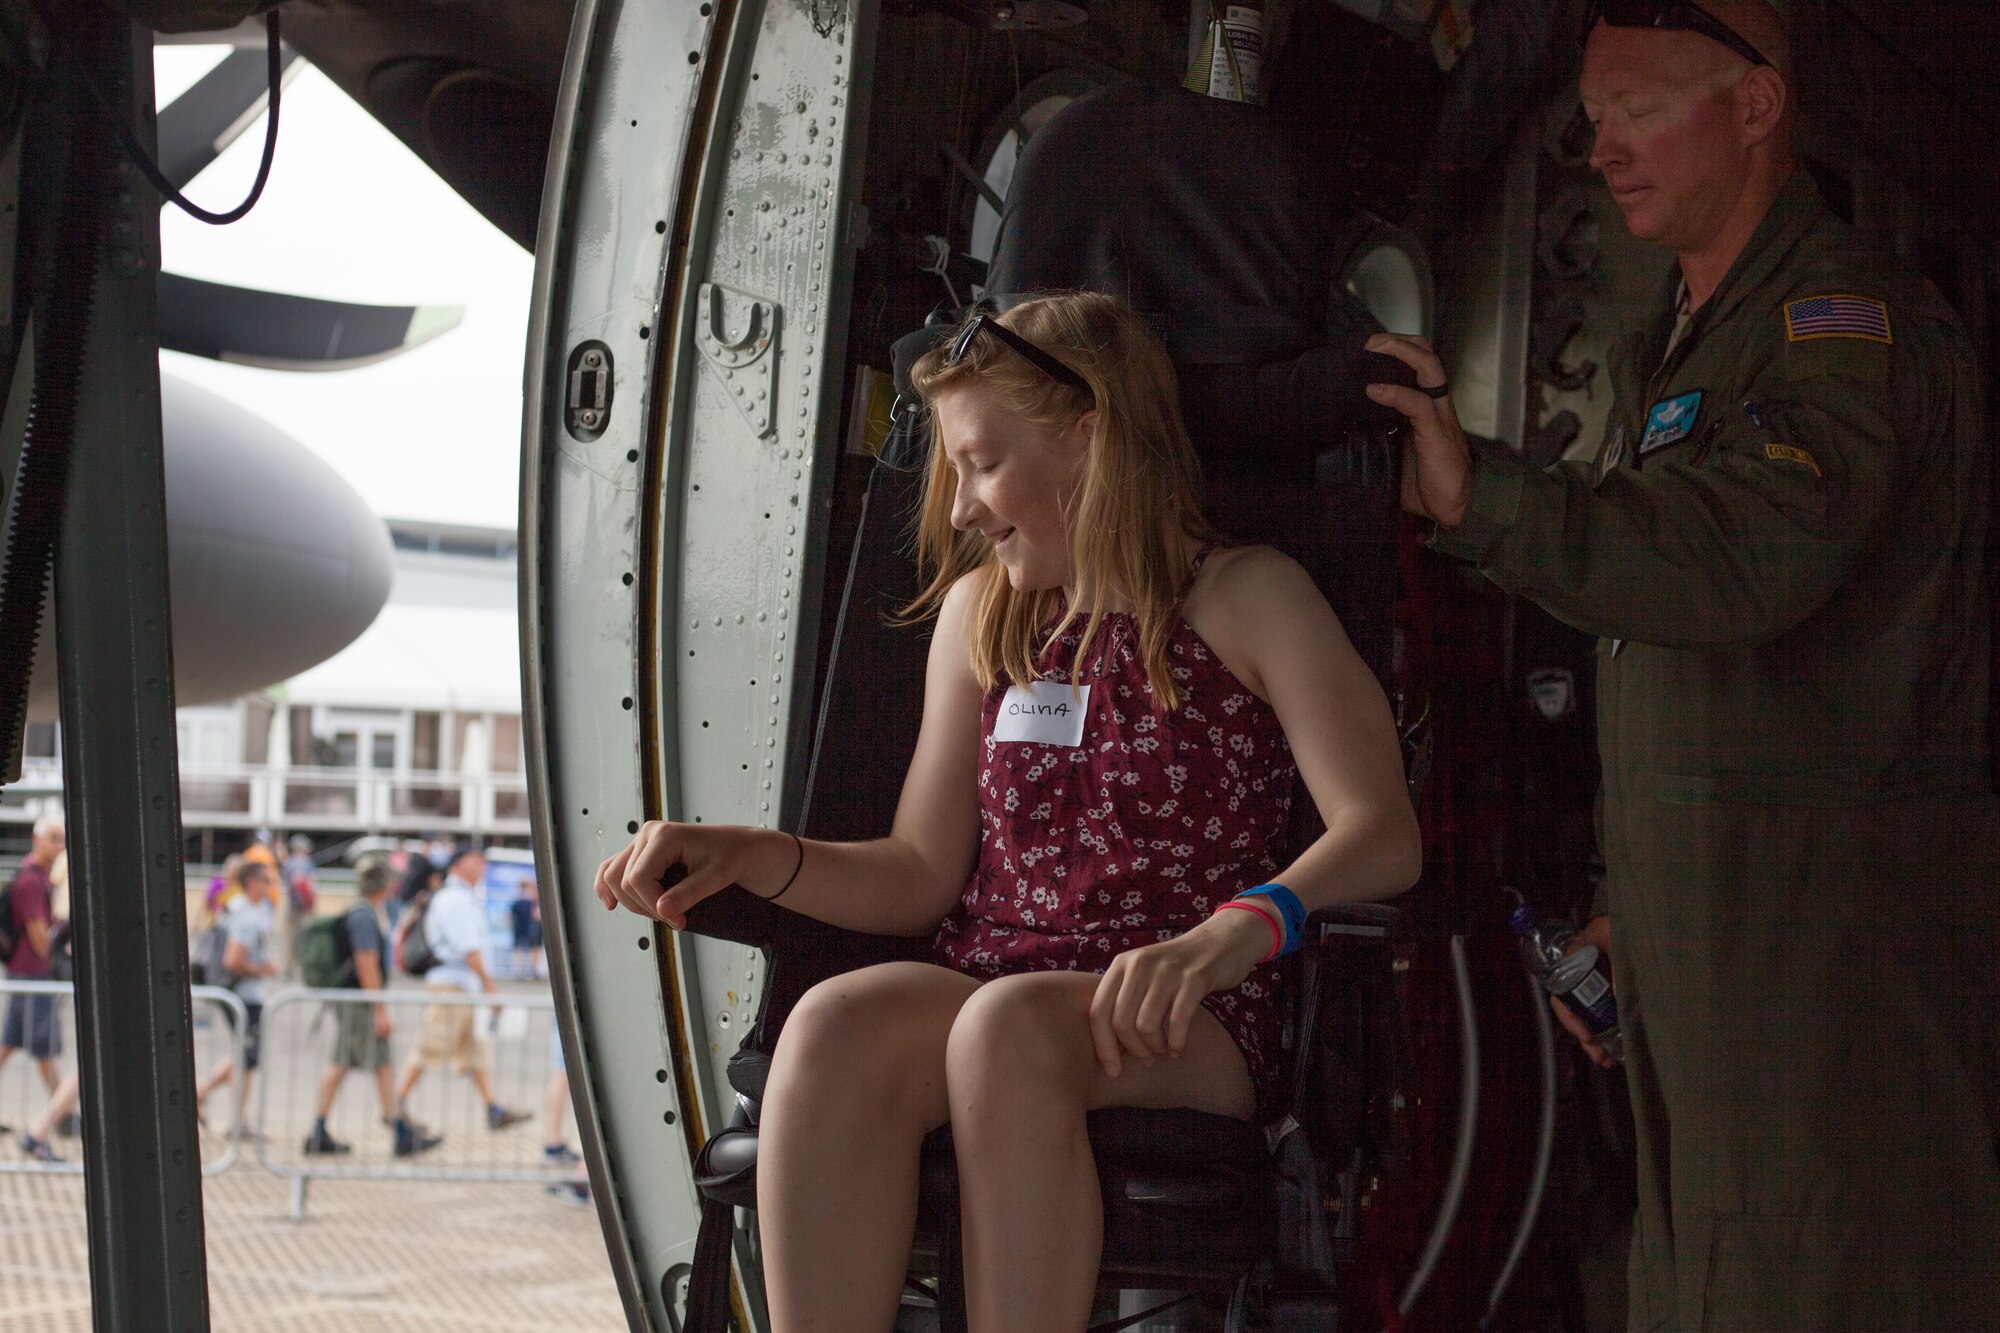 United States military personnel give aircraft tours to children at the Farnborough International Airshow, July 21, 2018 at Farnborough, United Kingdom. Over the weekend, FIA opened up to the general public to demonstrate the latest in military and civilian aircraft capabilities. Farnborough organizers, in conjunction with the Barrie Wells Trust, gave disabled children access to explore various U.S. Air Force and U.S. Army aircraft (U.S. Air Force photo by Capt. Allie Delury)